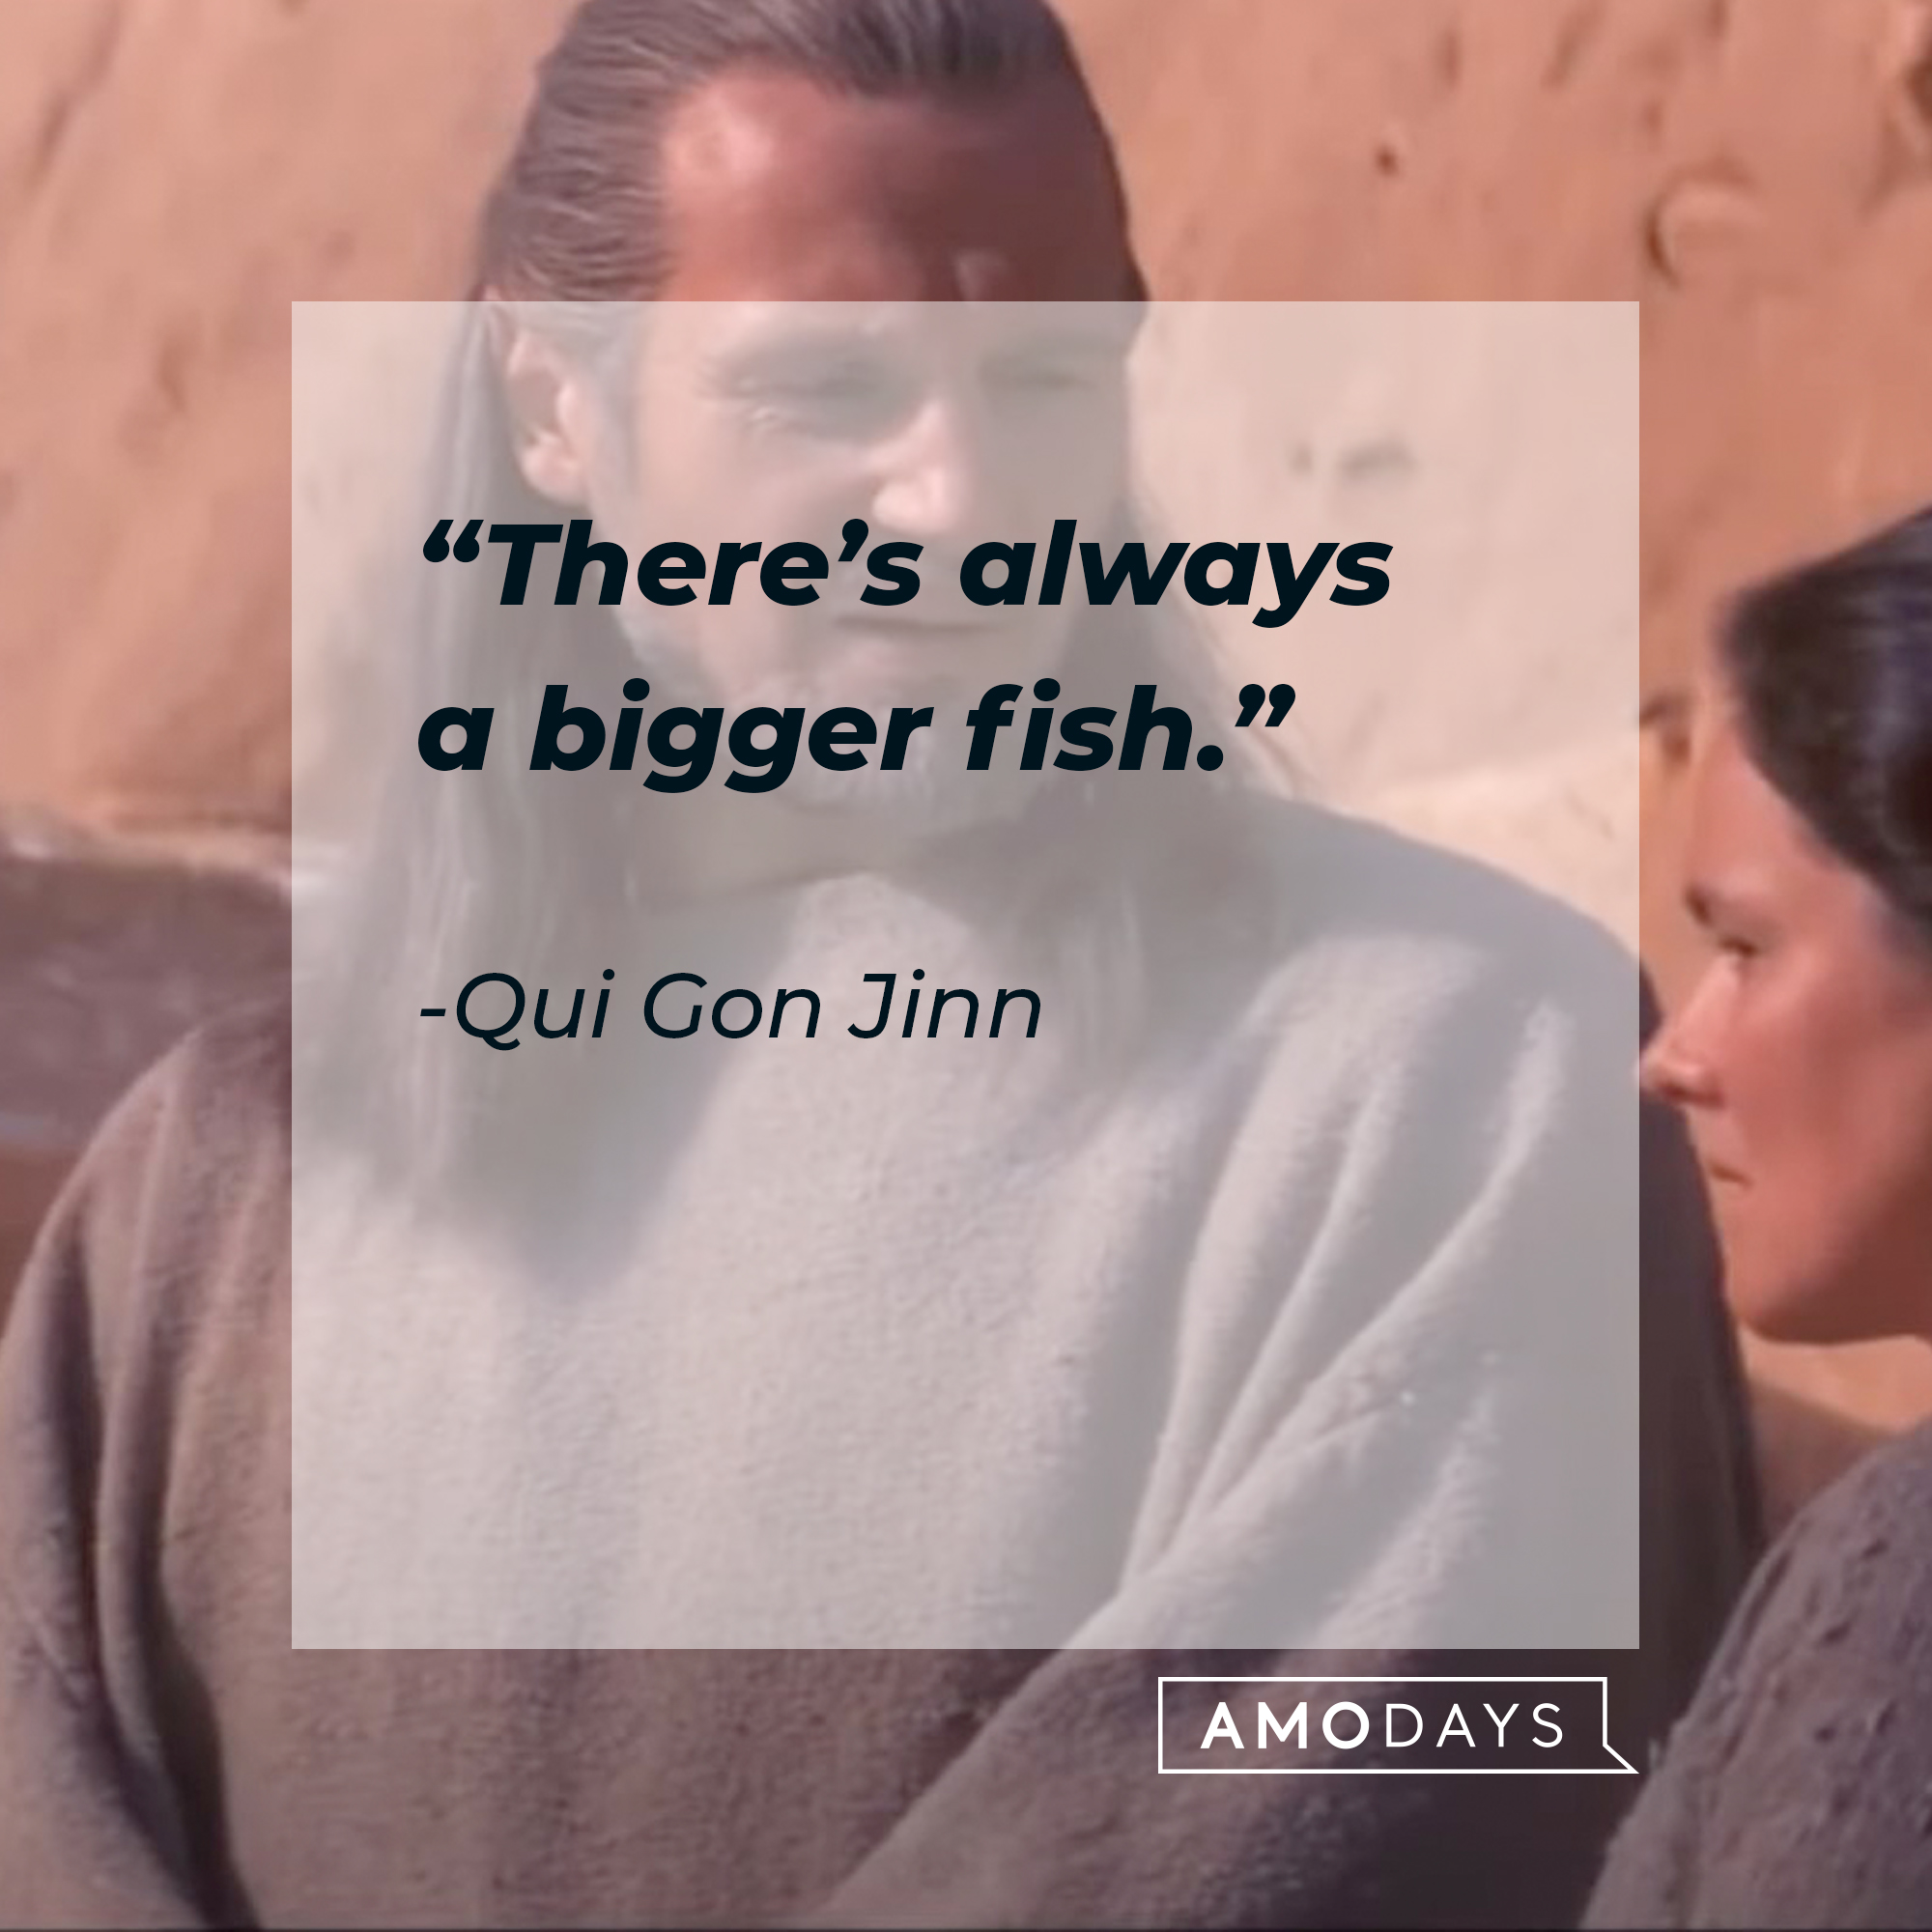 A picture of Qui Gon Jinn with a quote by him: “There’s always a bigger fish.” | Source: facebook.com/StarWars